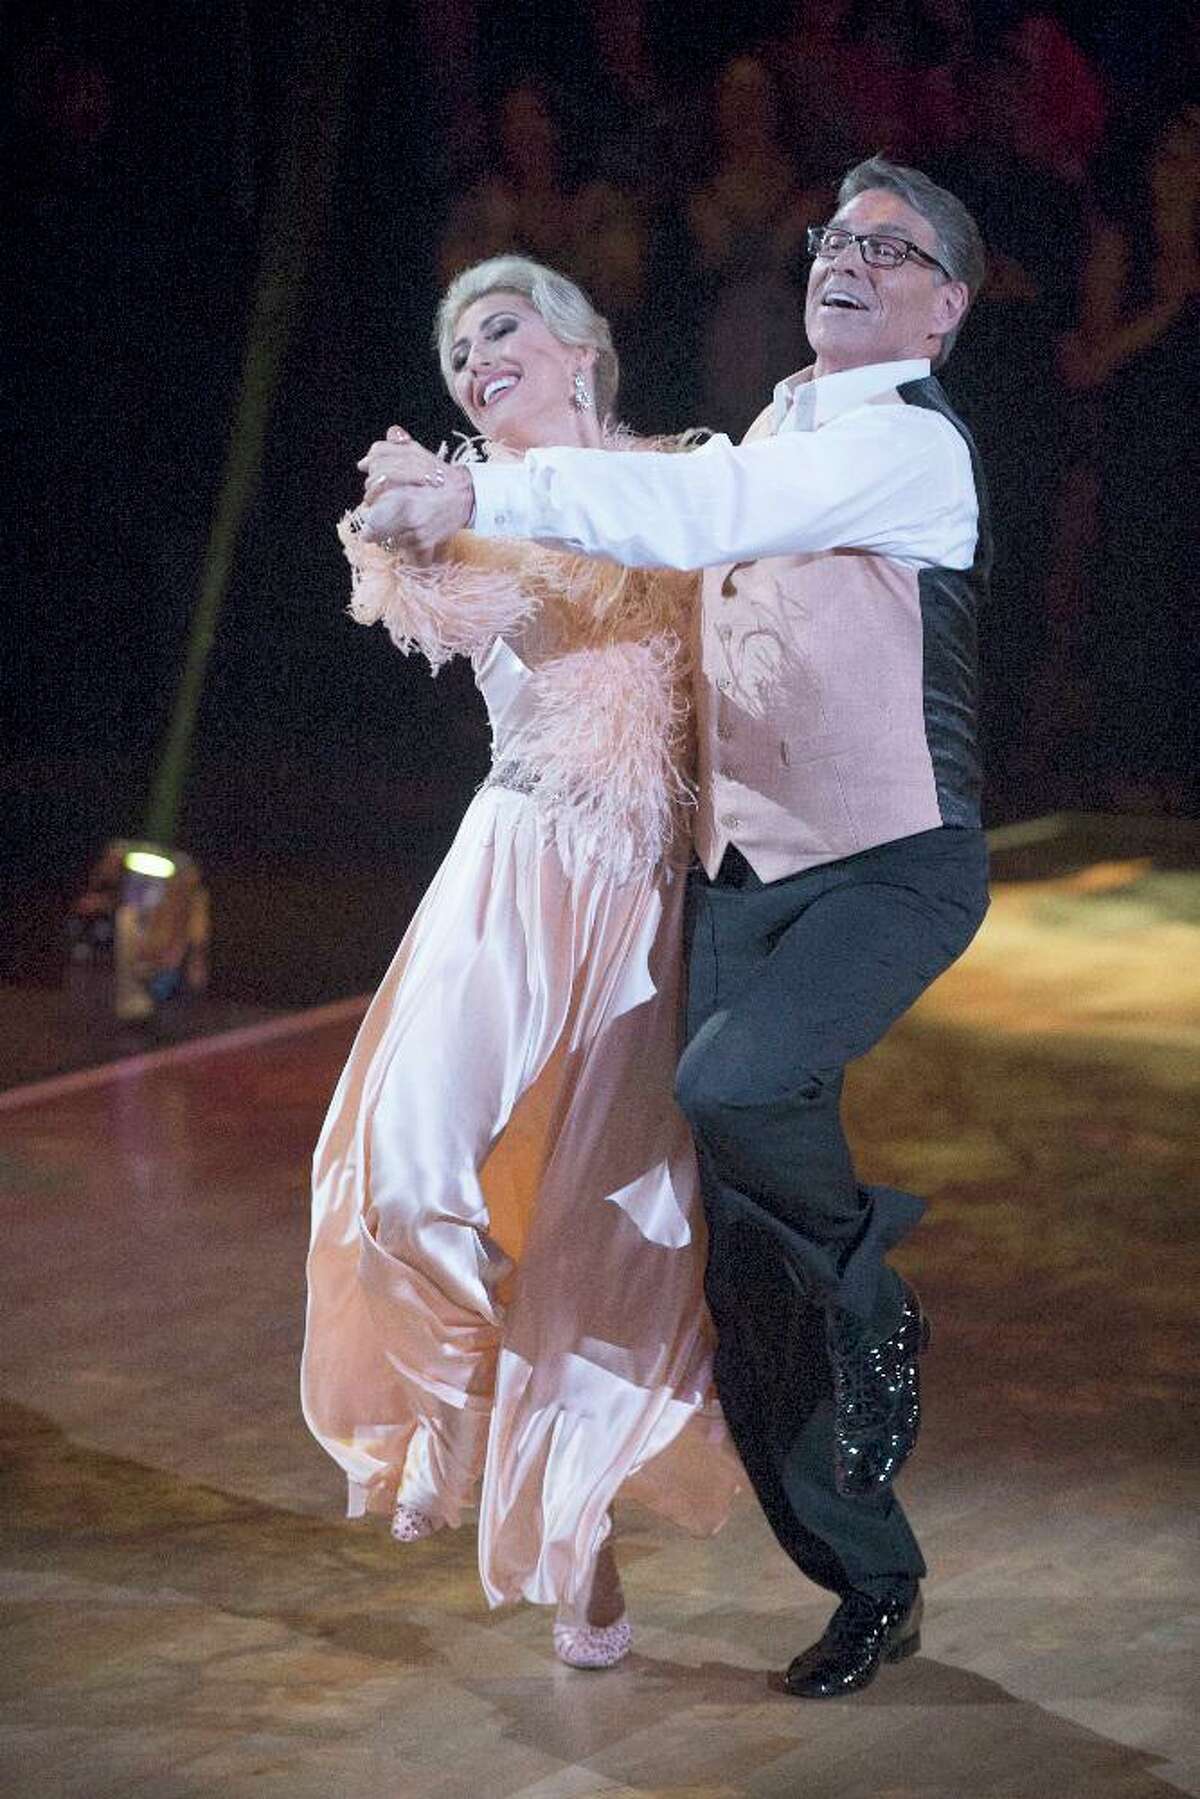 Rick Perry and Emma Slater take a twirl on “Dancing with the Stars.” A reader thinks this was more honest work than joining the Trump administration.